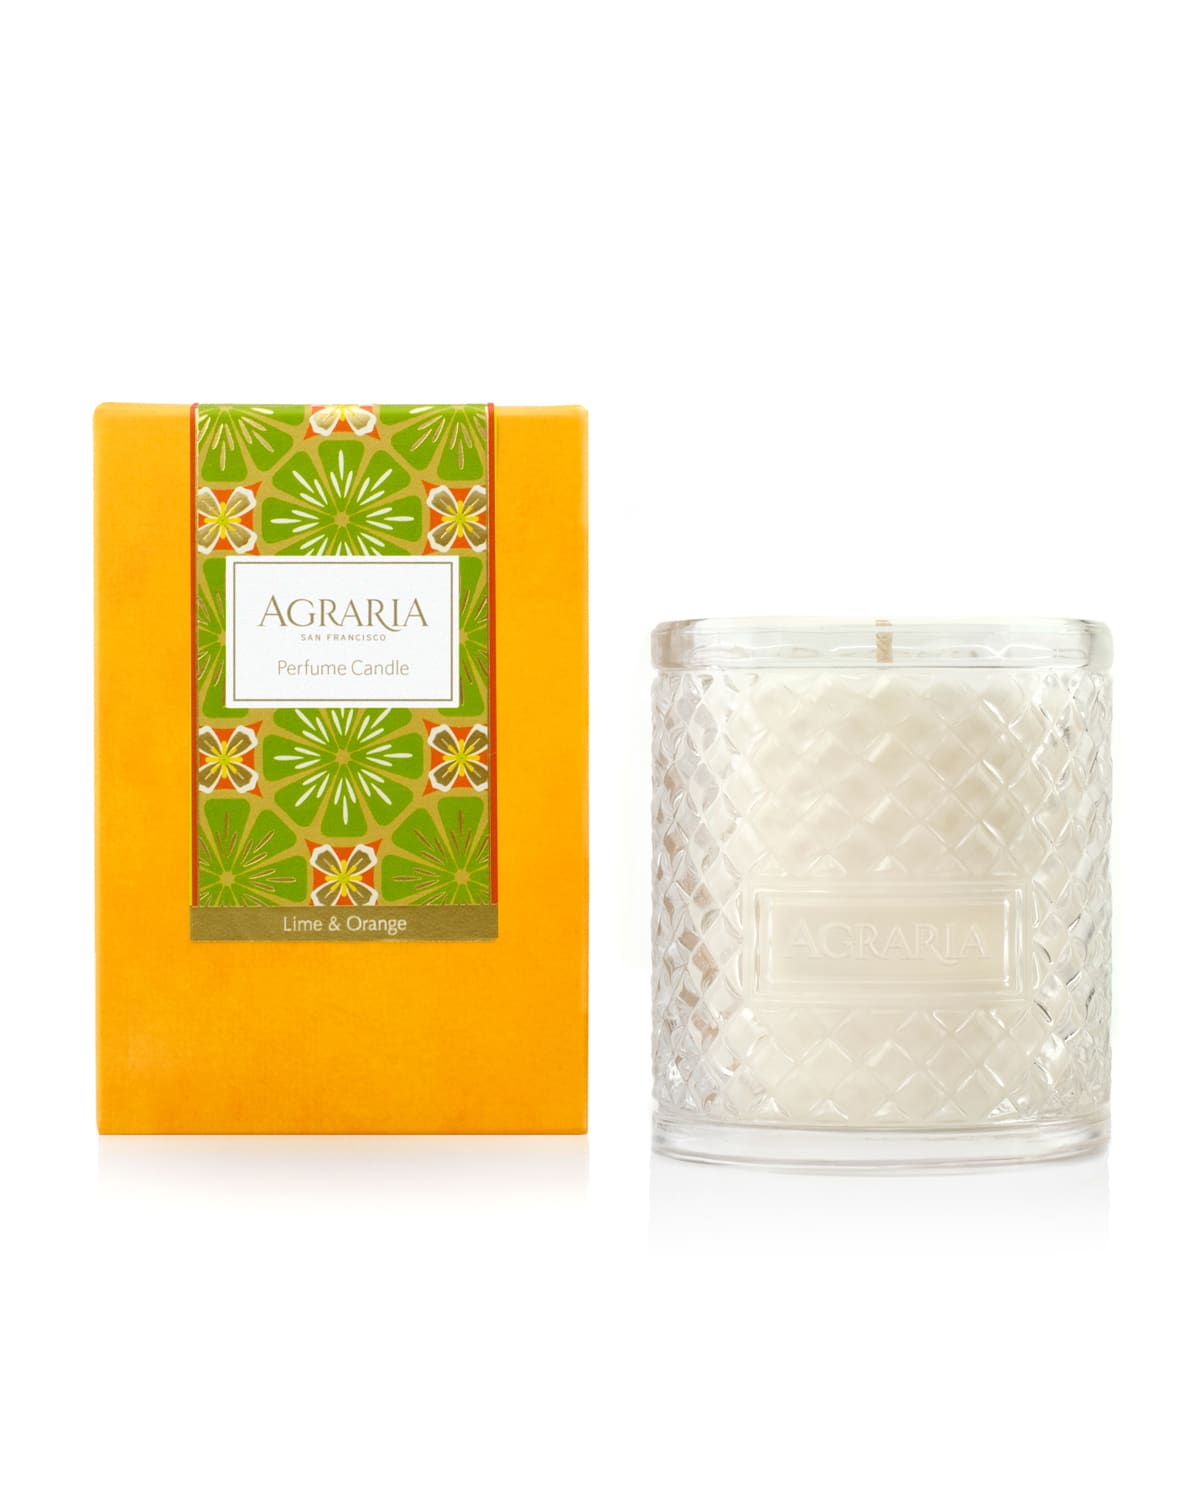 Agraria Lime & Orange Blossoms Woven Crystal Perfume Candle, 7 oz.